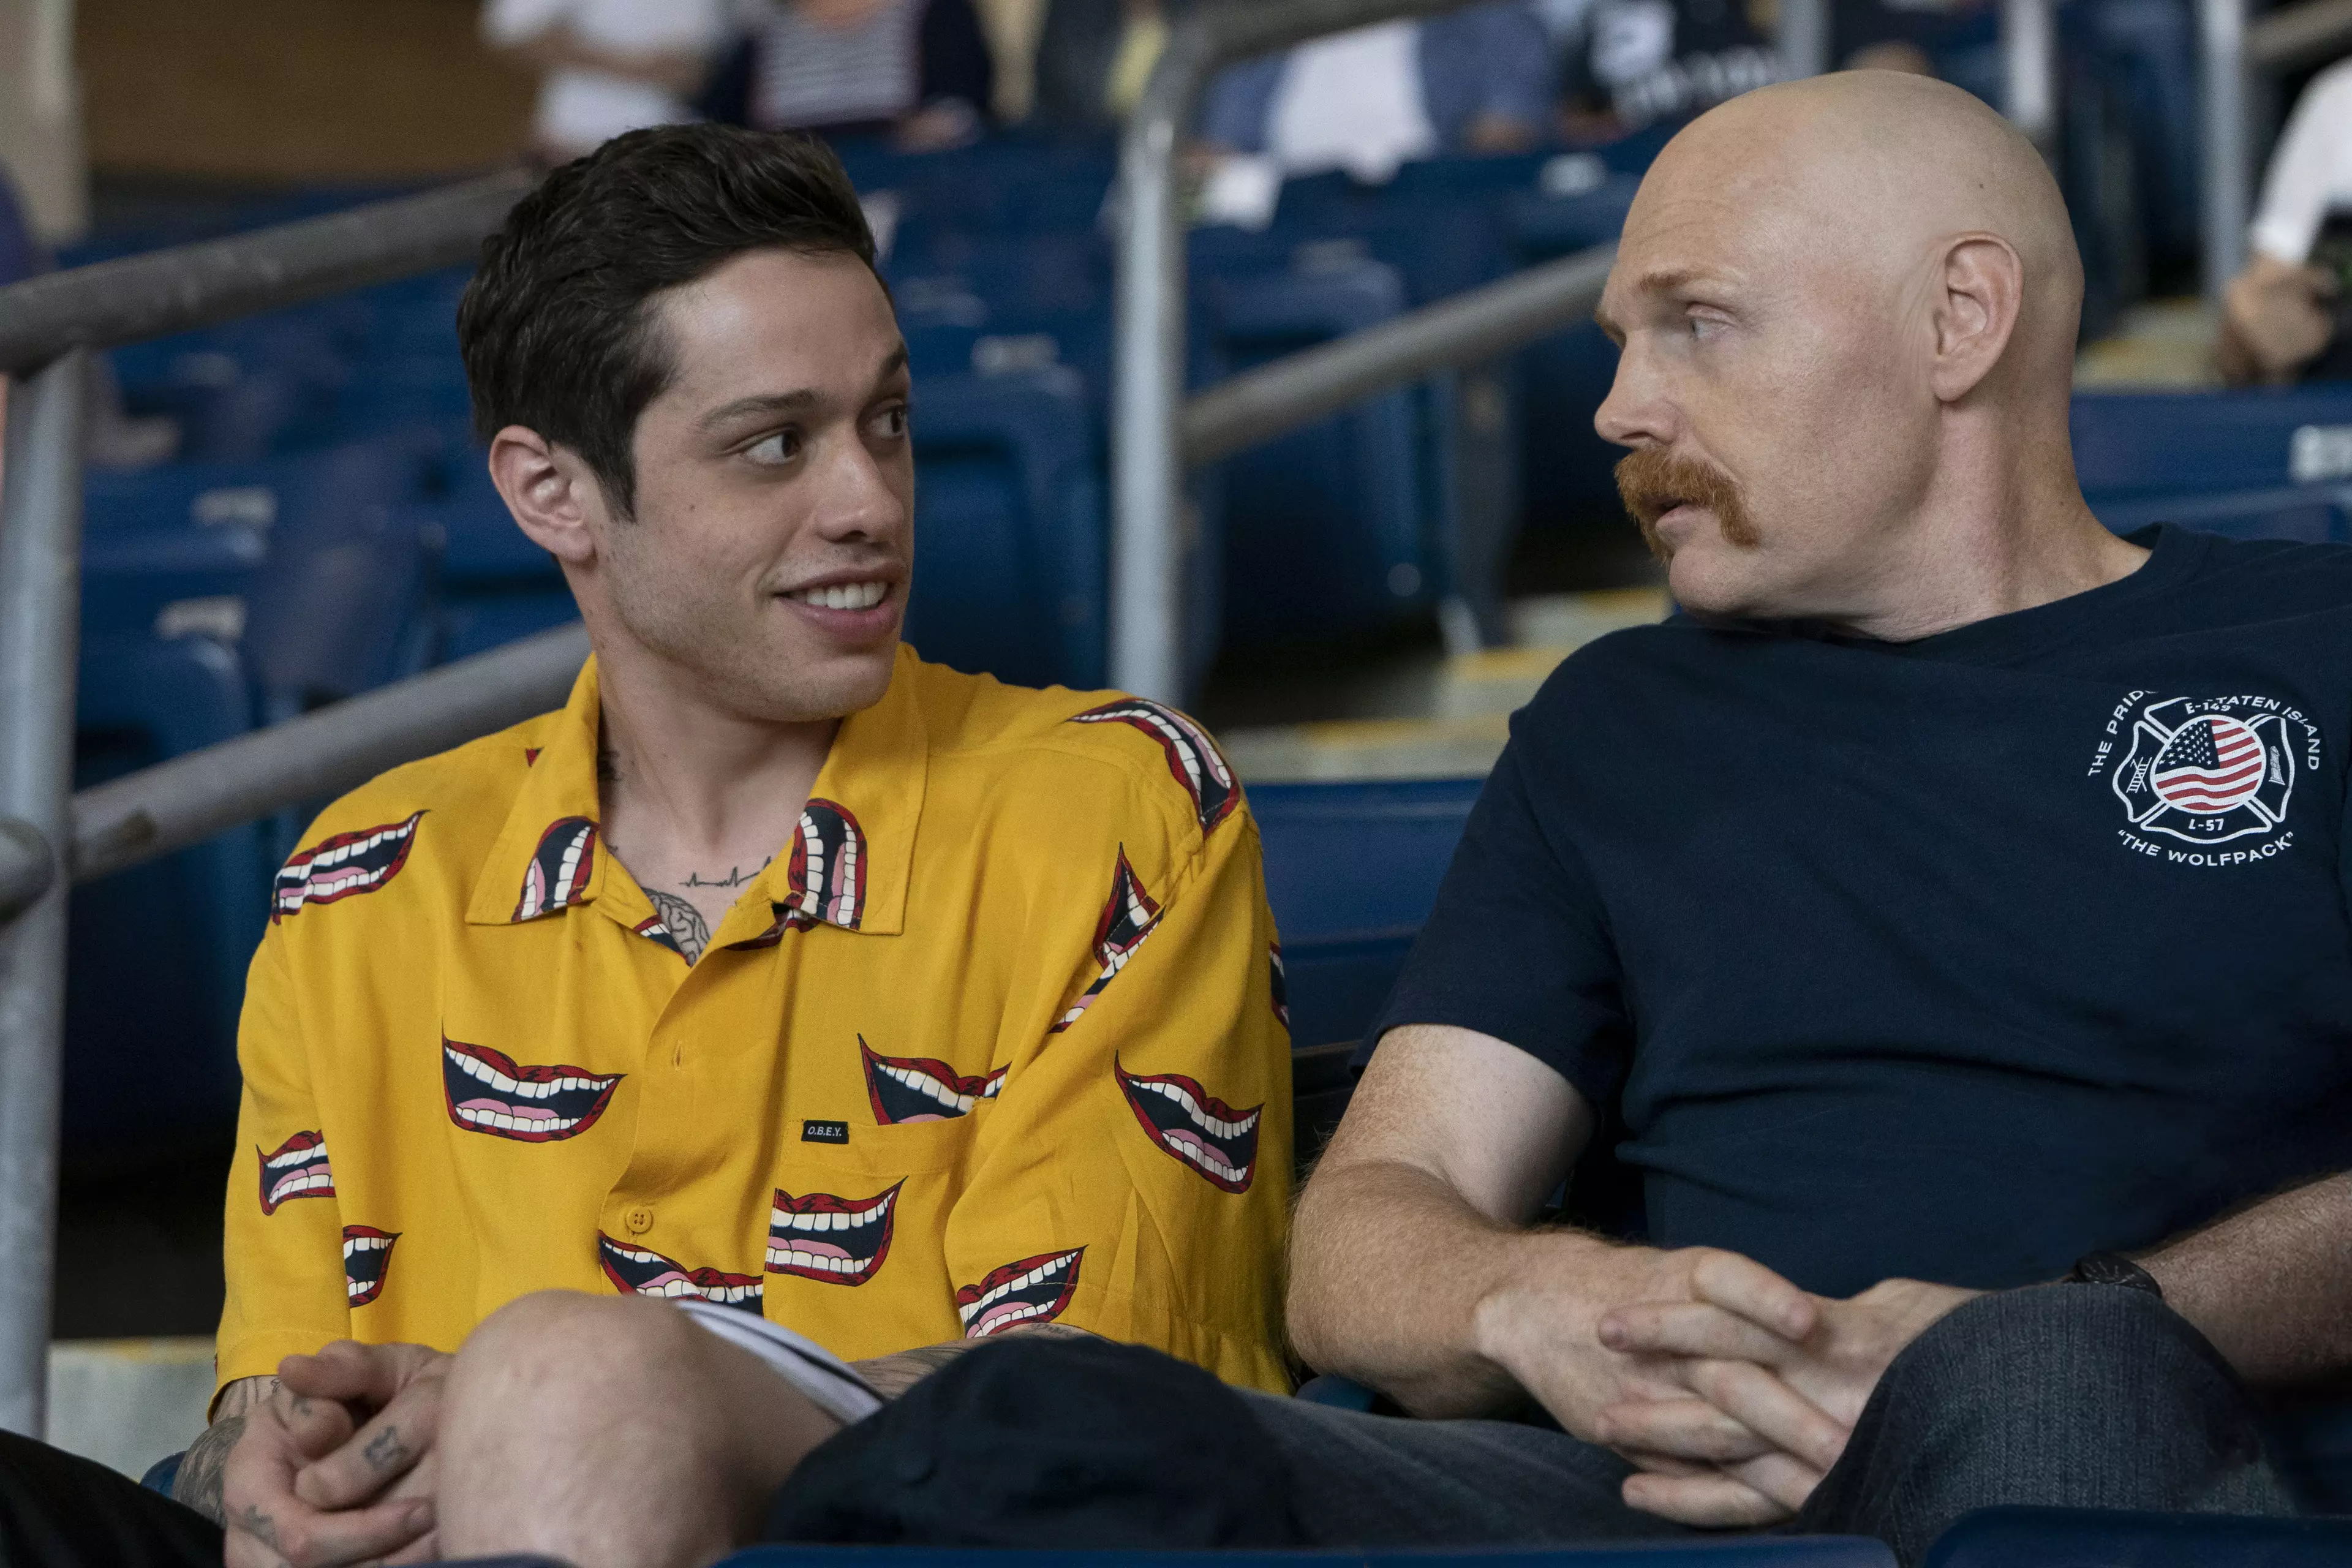 Scott (Pete Davidson) clashes with his mum's new partner Ray (Bill Burr) in the movie.